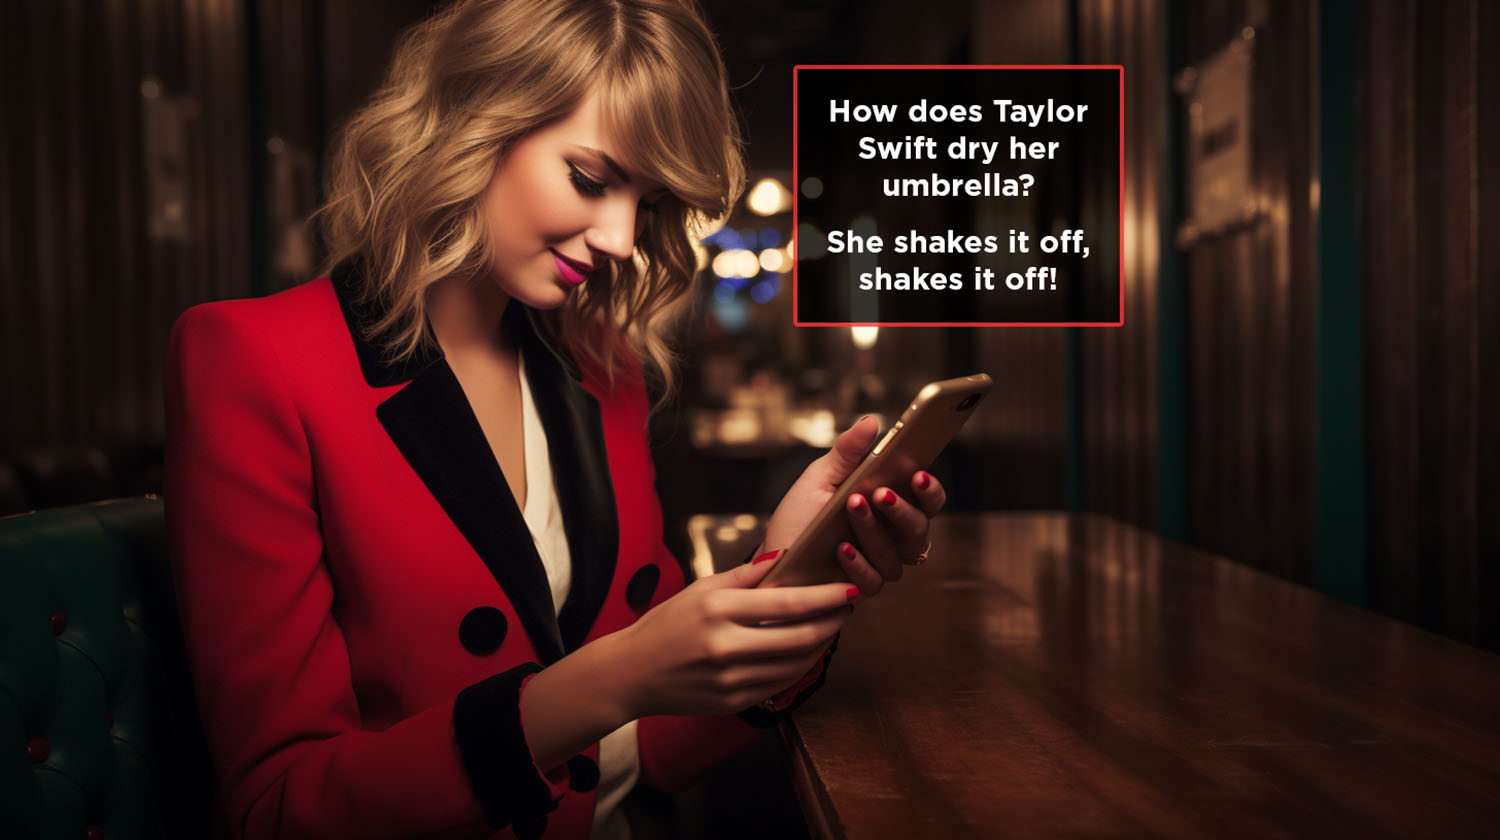 Taylor Swift In A Red Jacket Looking At Her Phone And Reading Funny Taylor Swift Jokes.